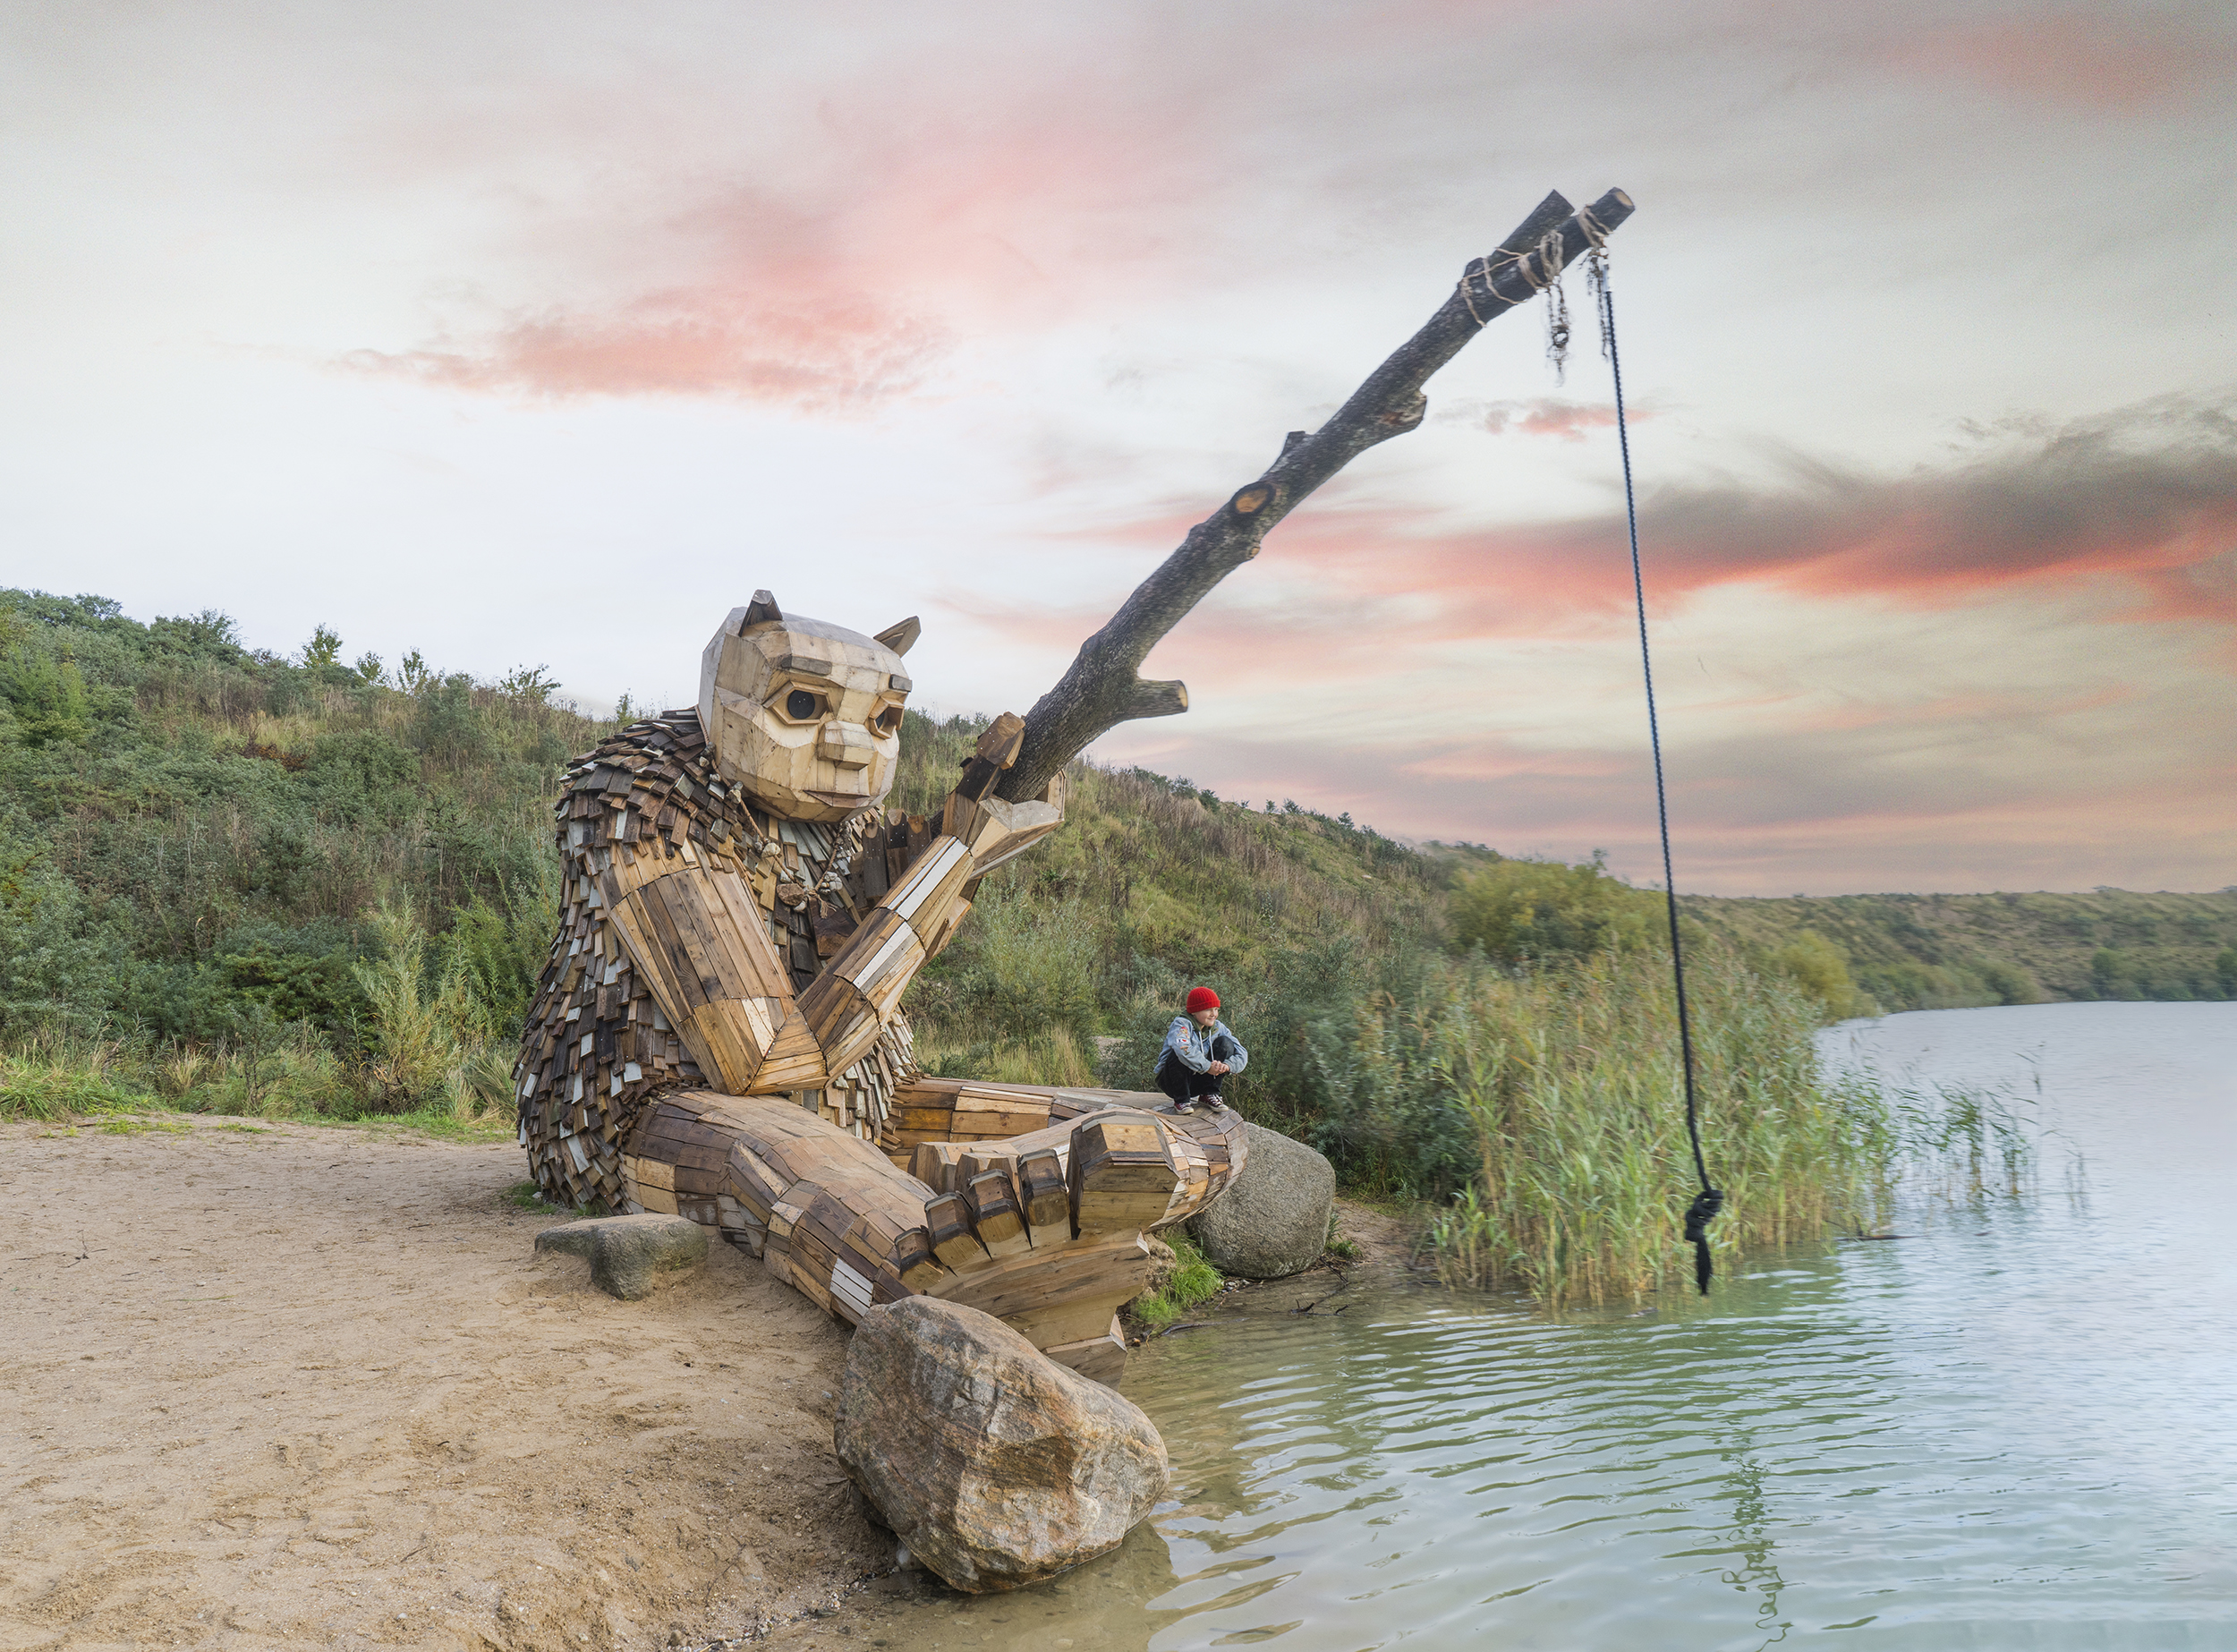 A giant wooden troll statue fishes in a pond